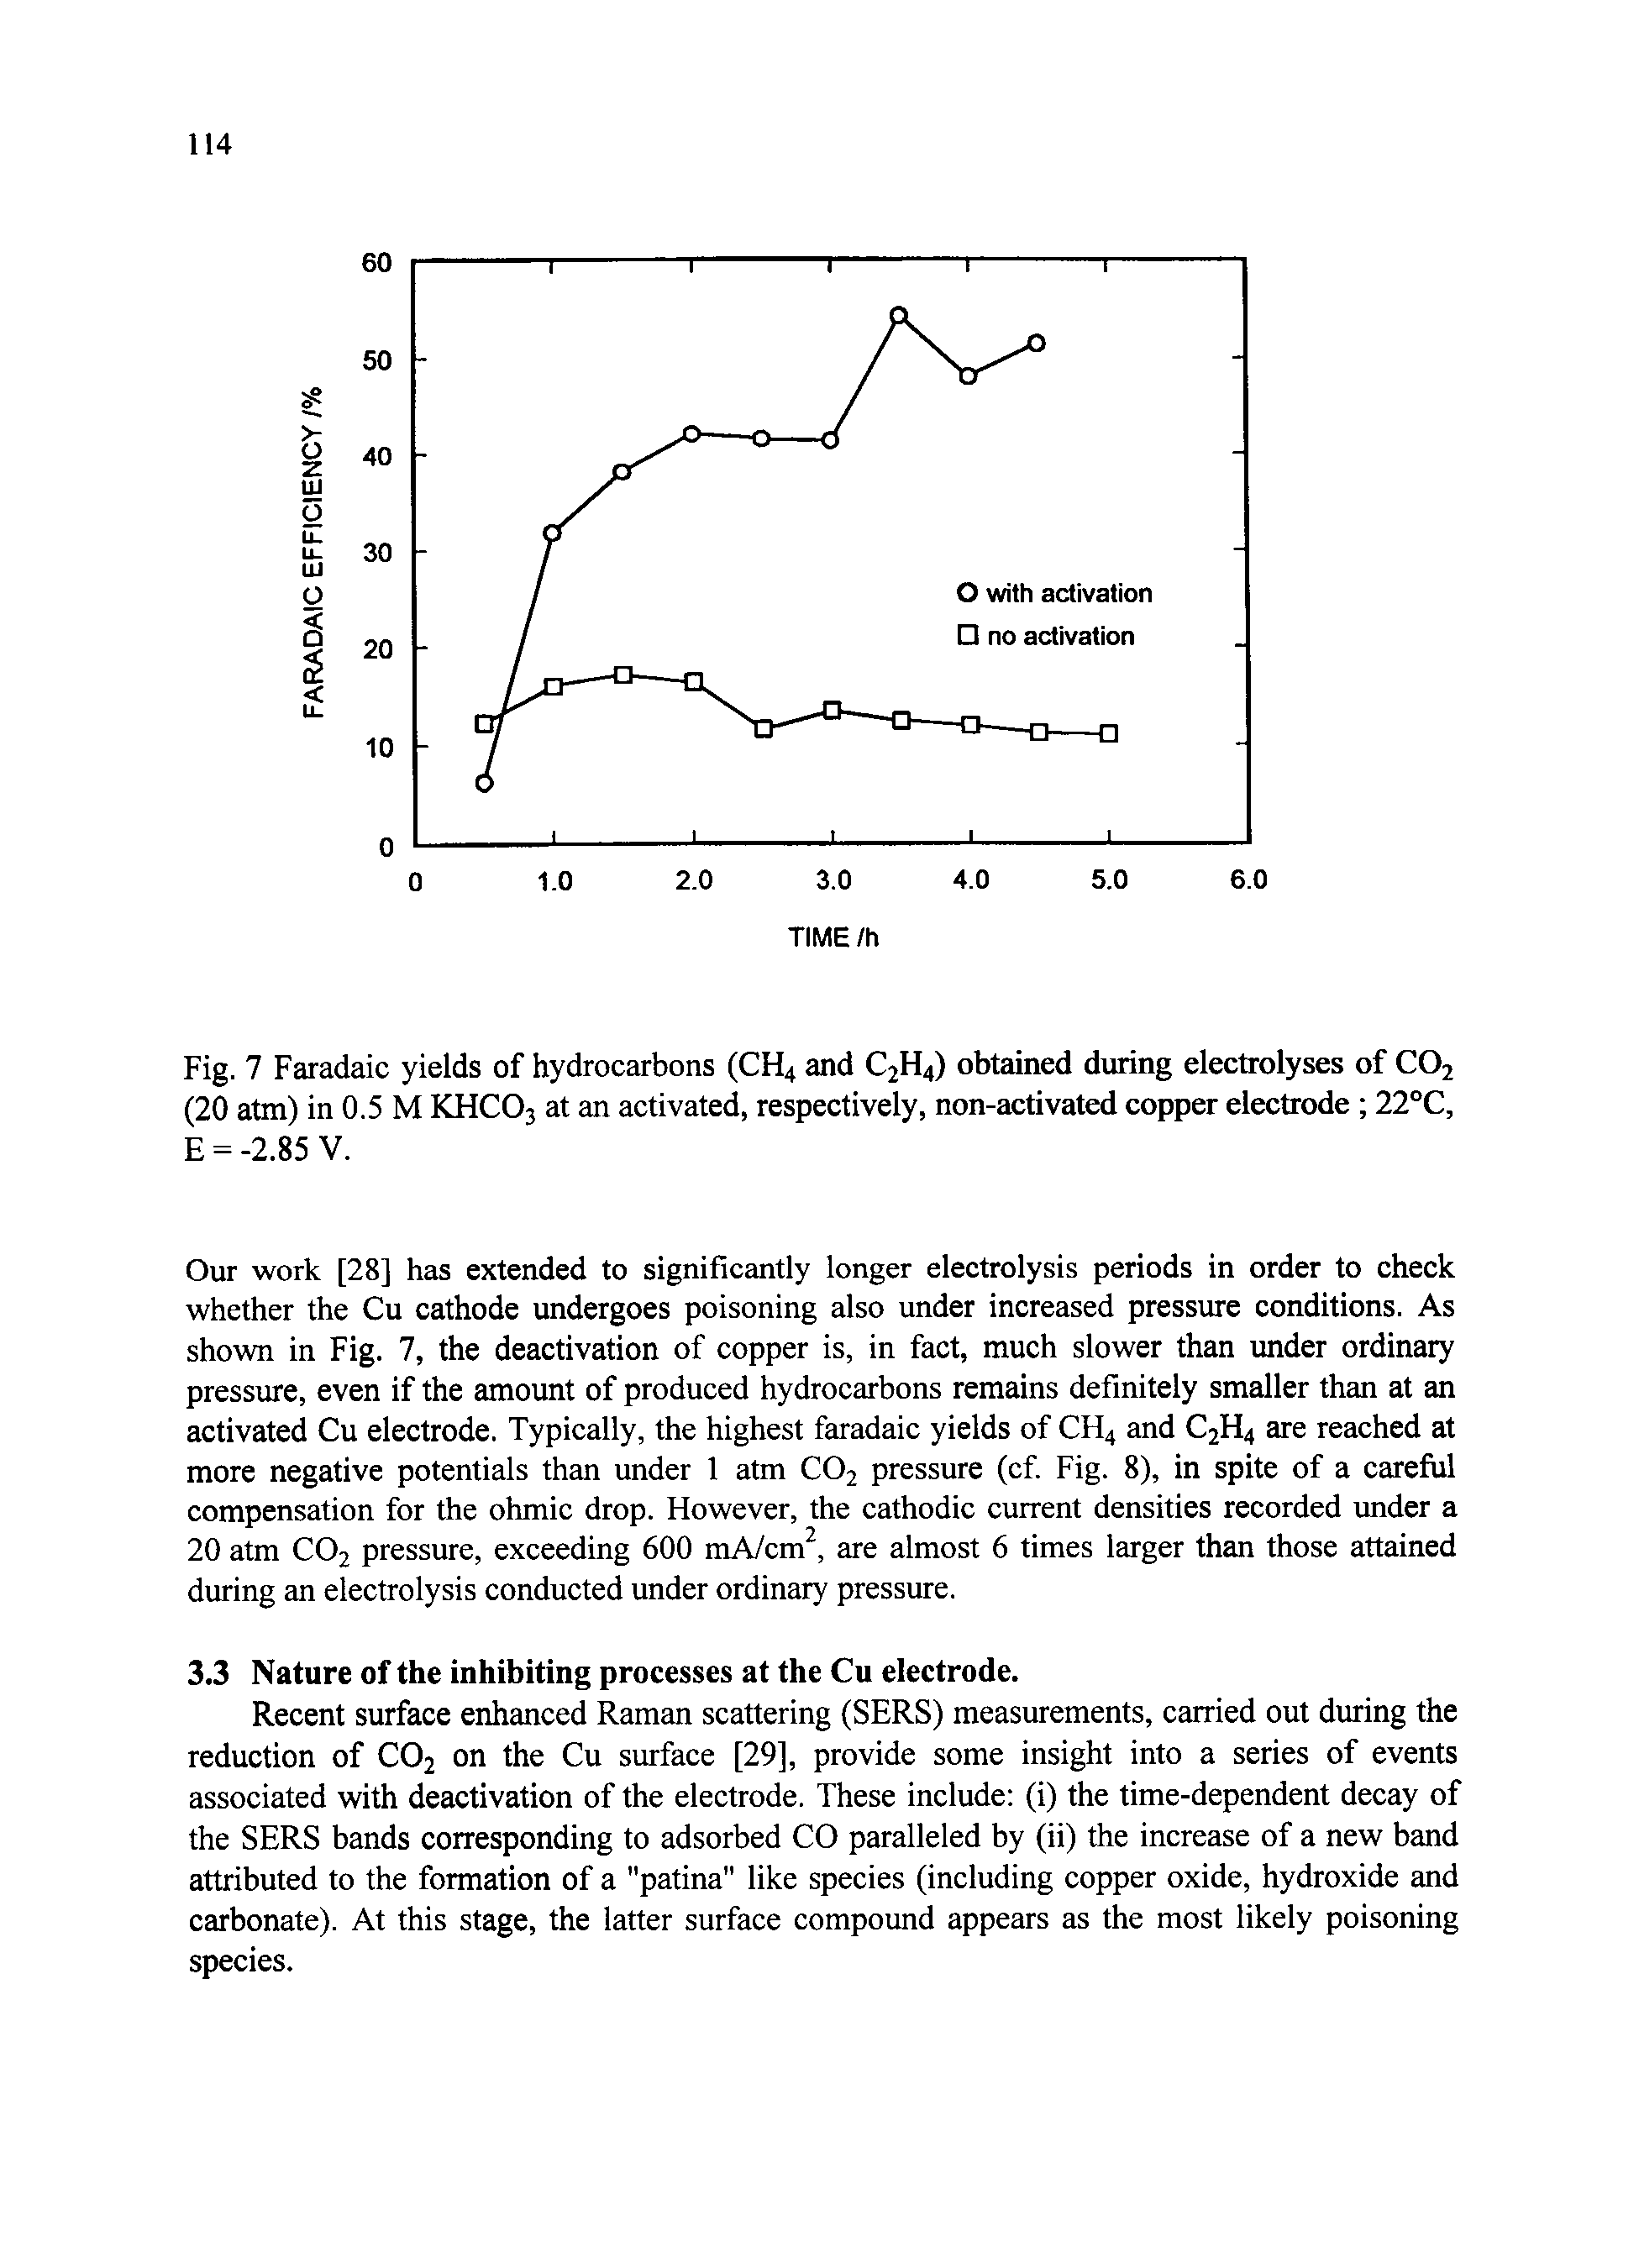 Fig. 7 Faradaic yields of hydrocarbons (CH4 and C2H4) obtained during electrolyses of CO2 (20 atm) in 0.5 M KHCO3 at an activated, respectively, non-activated copper electrode 22°C, E = -2.85 V.